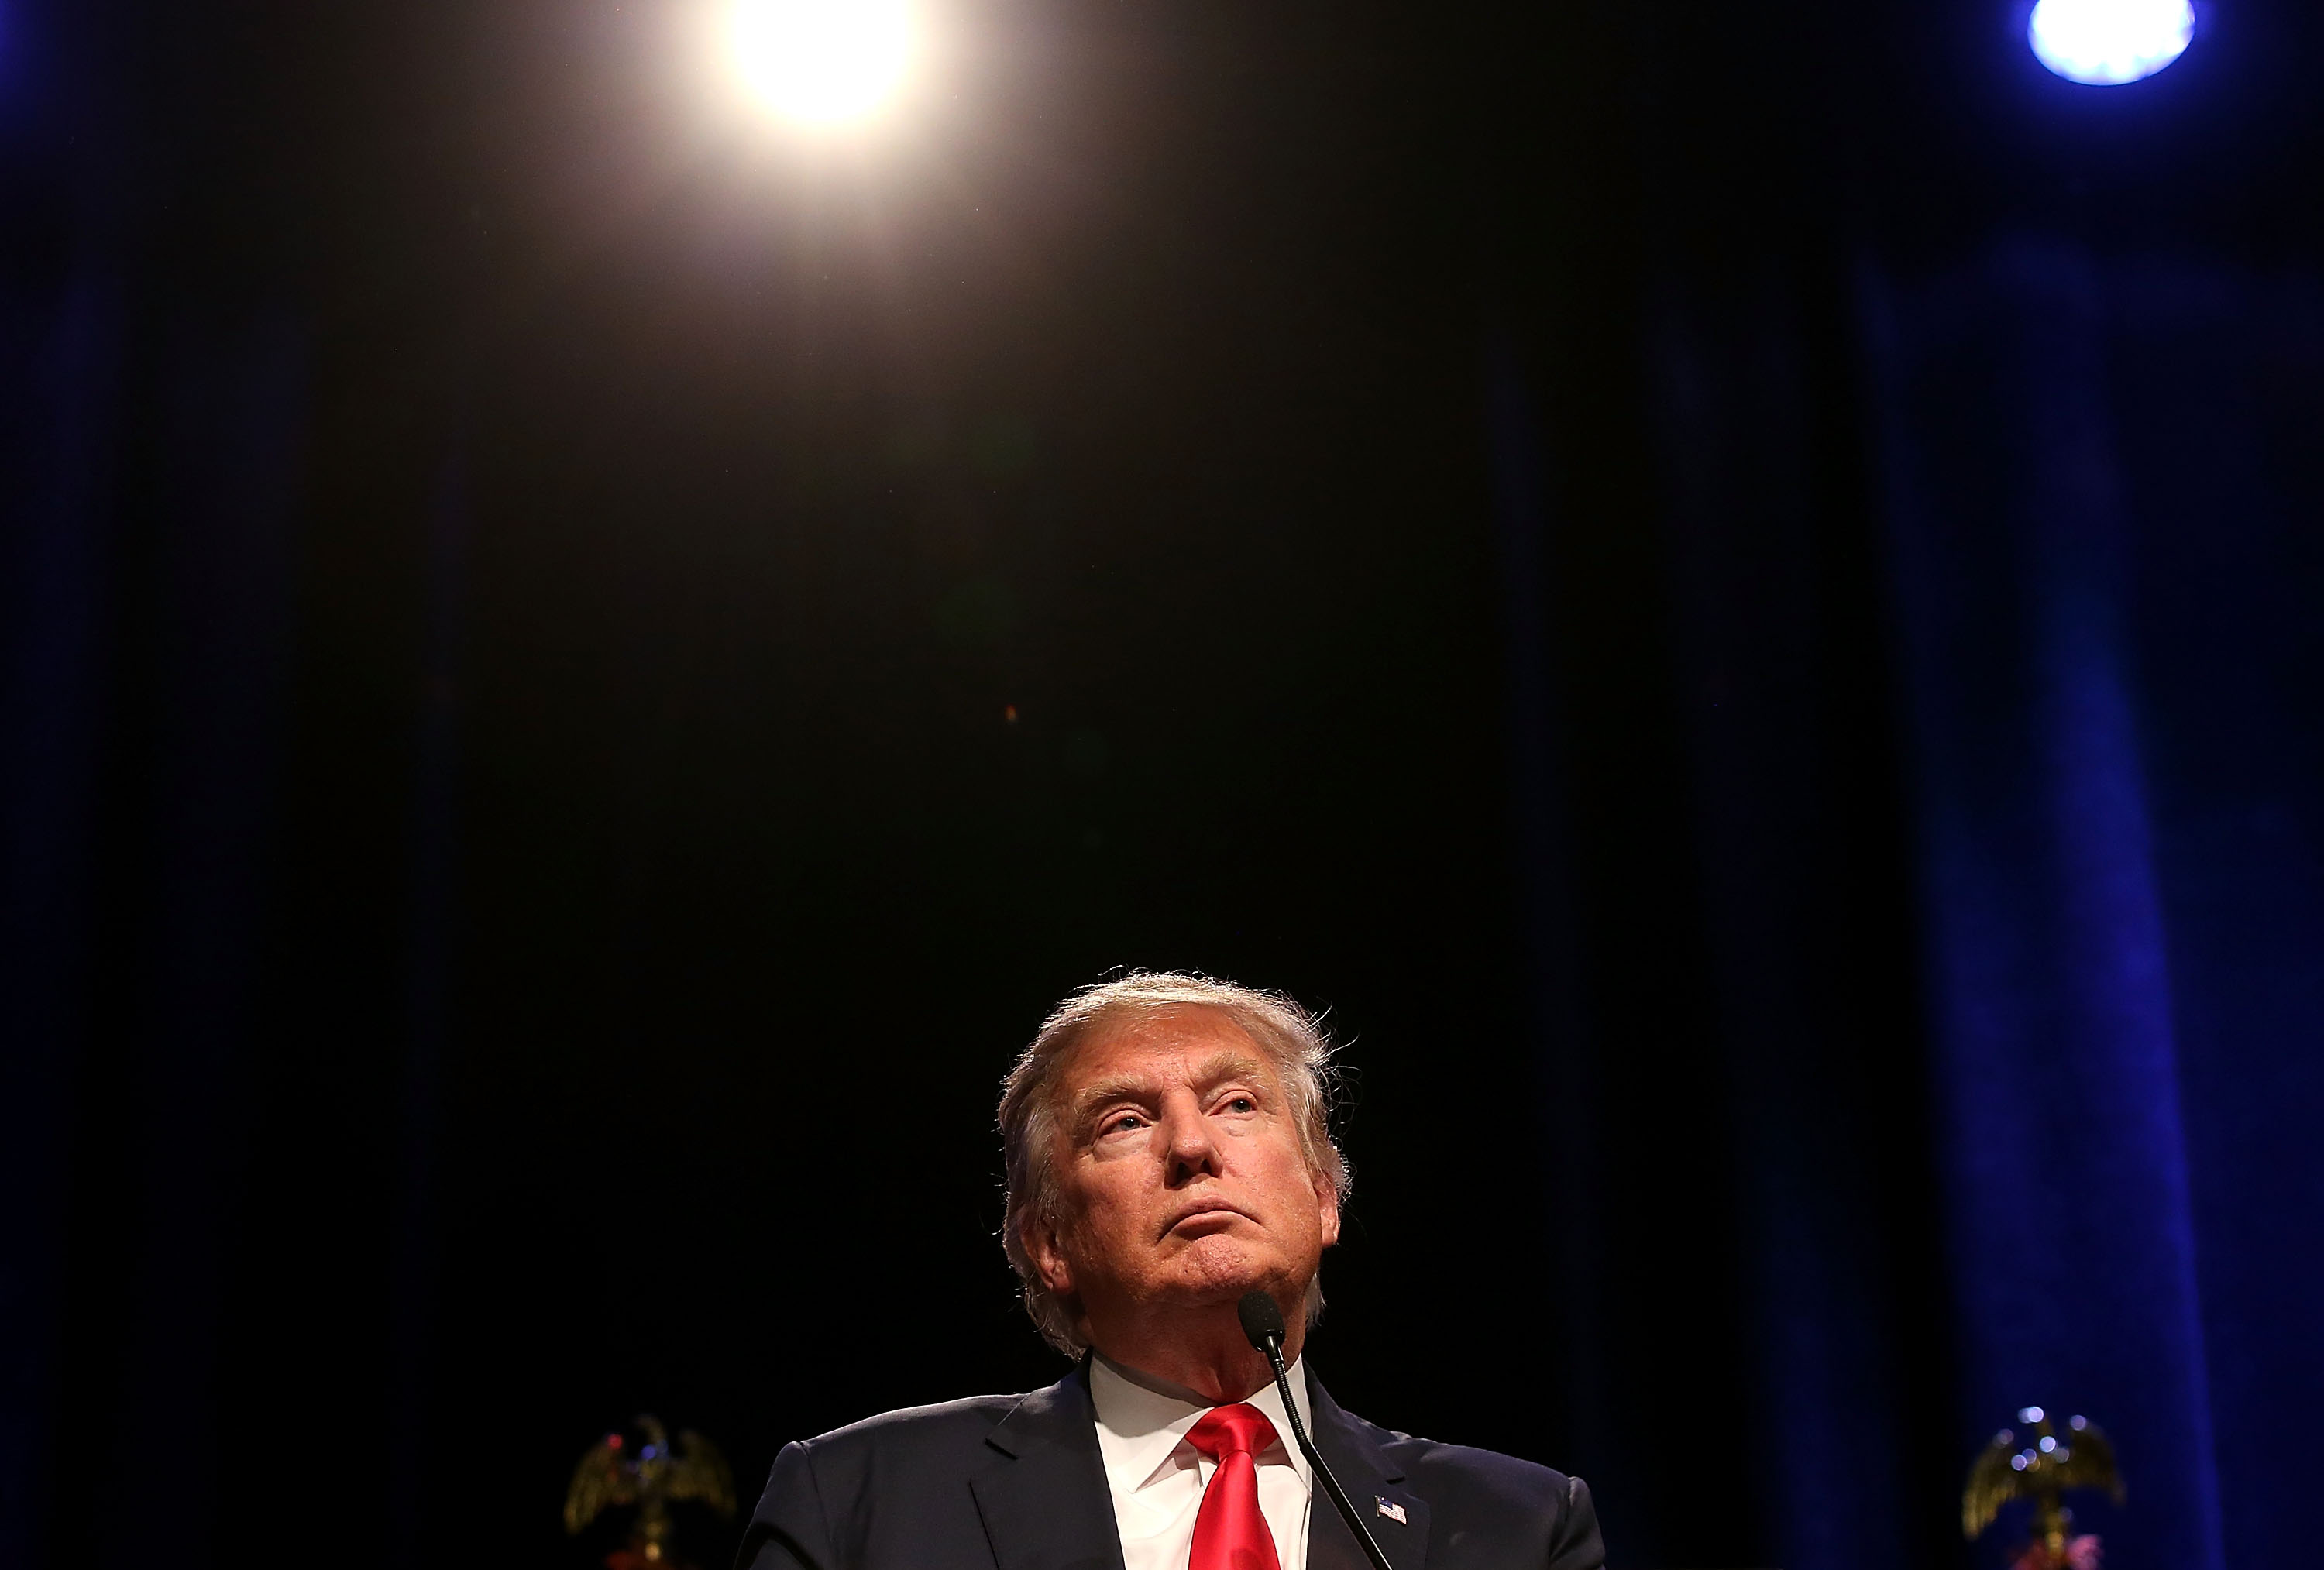 Donald Trump speaks during a campaign rally in Las Vegas on Dec. 14, 2015. (Justin Sullivan—Getty Images)